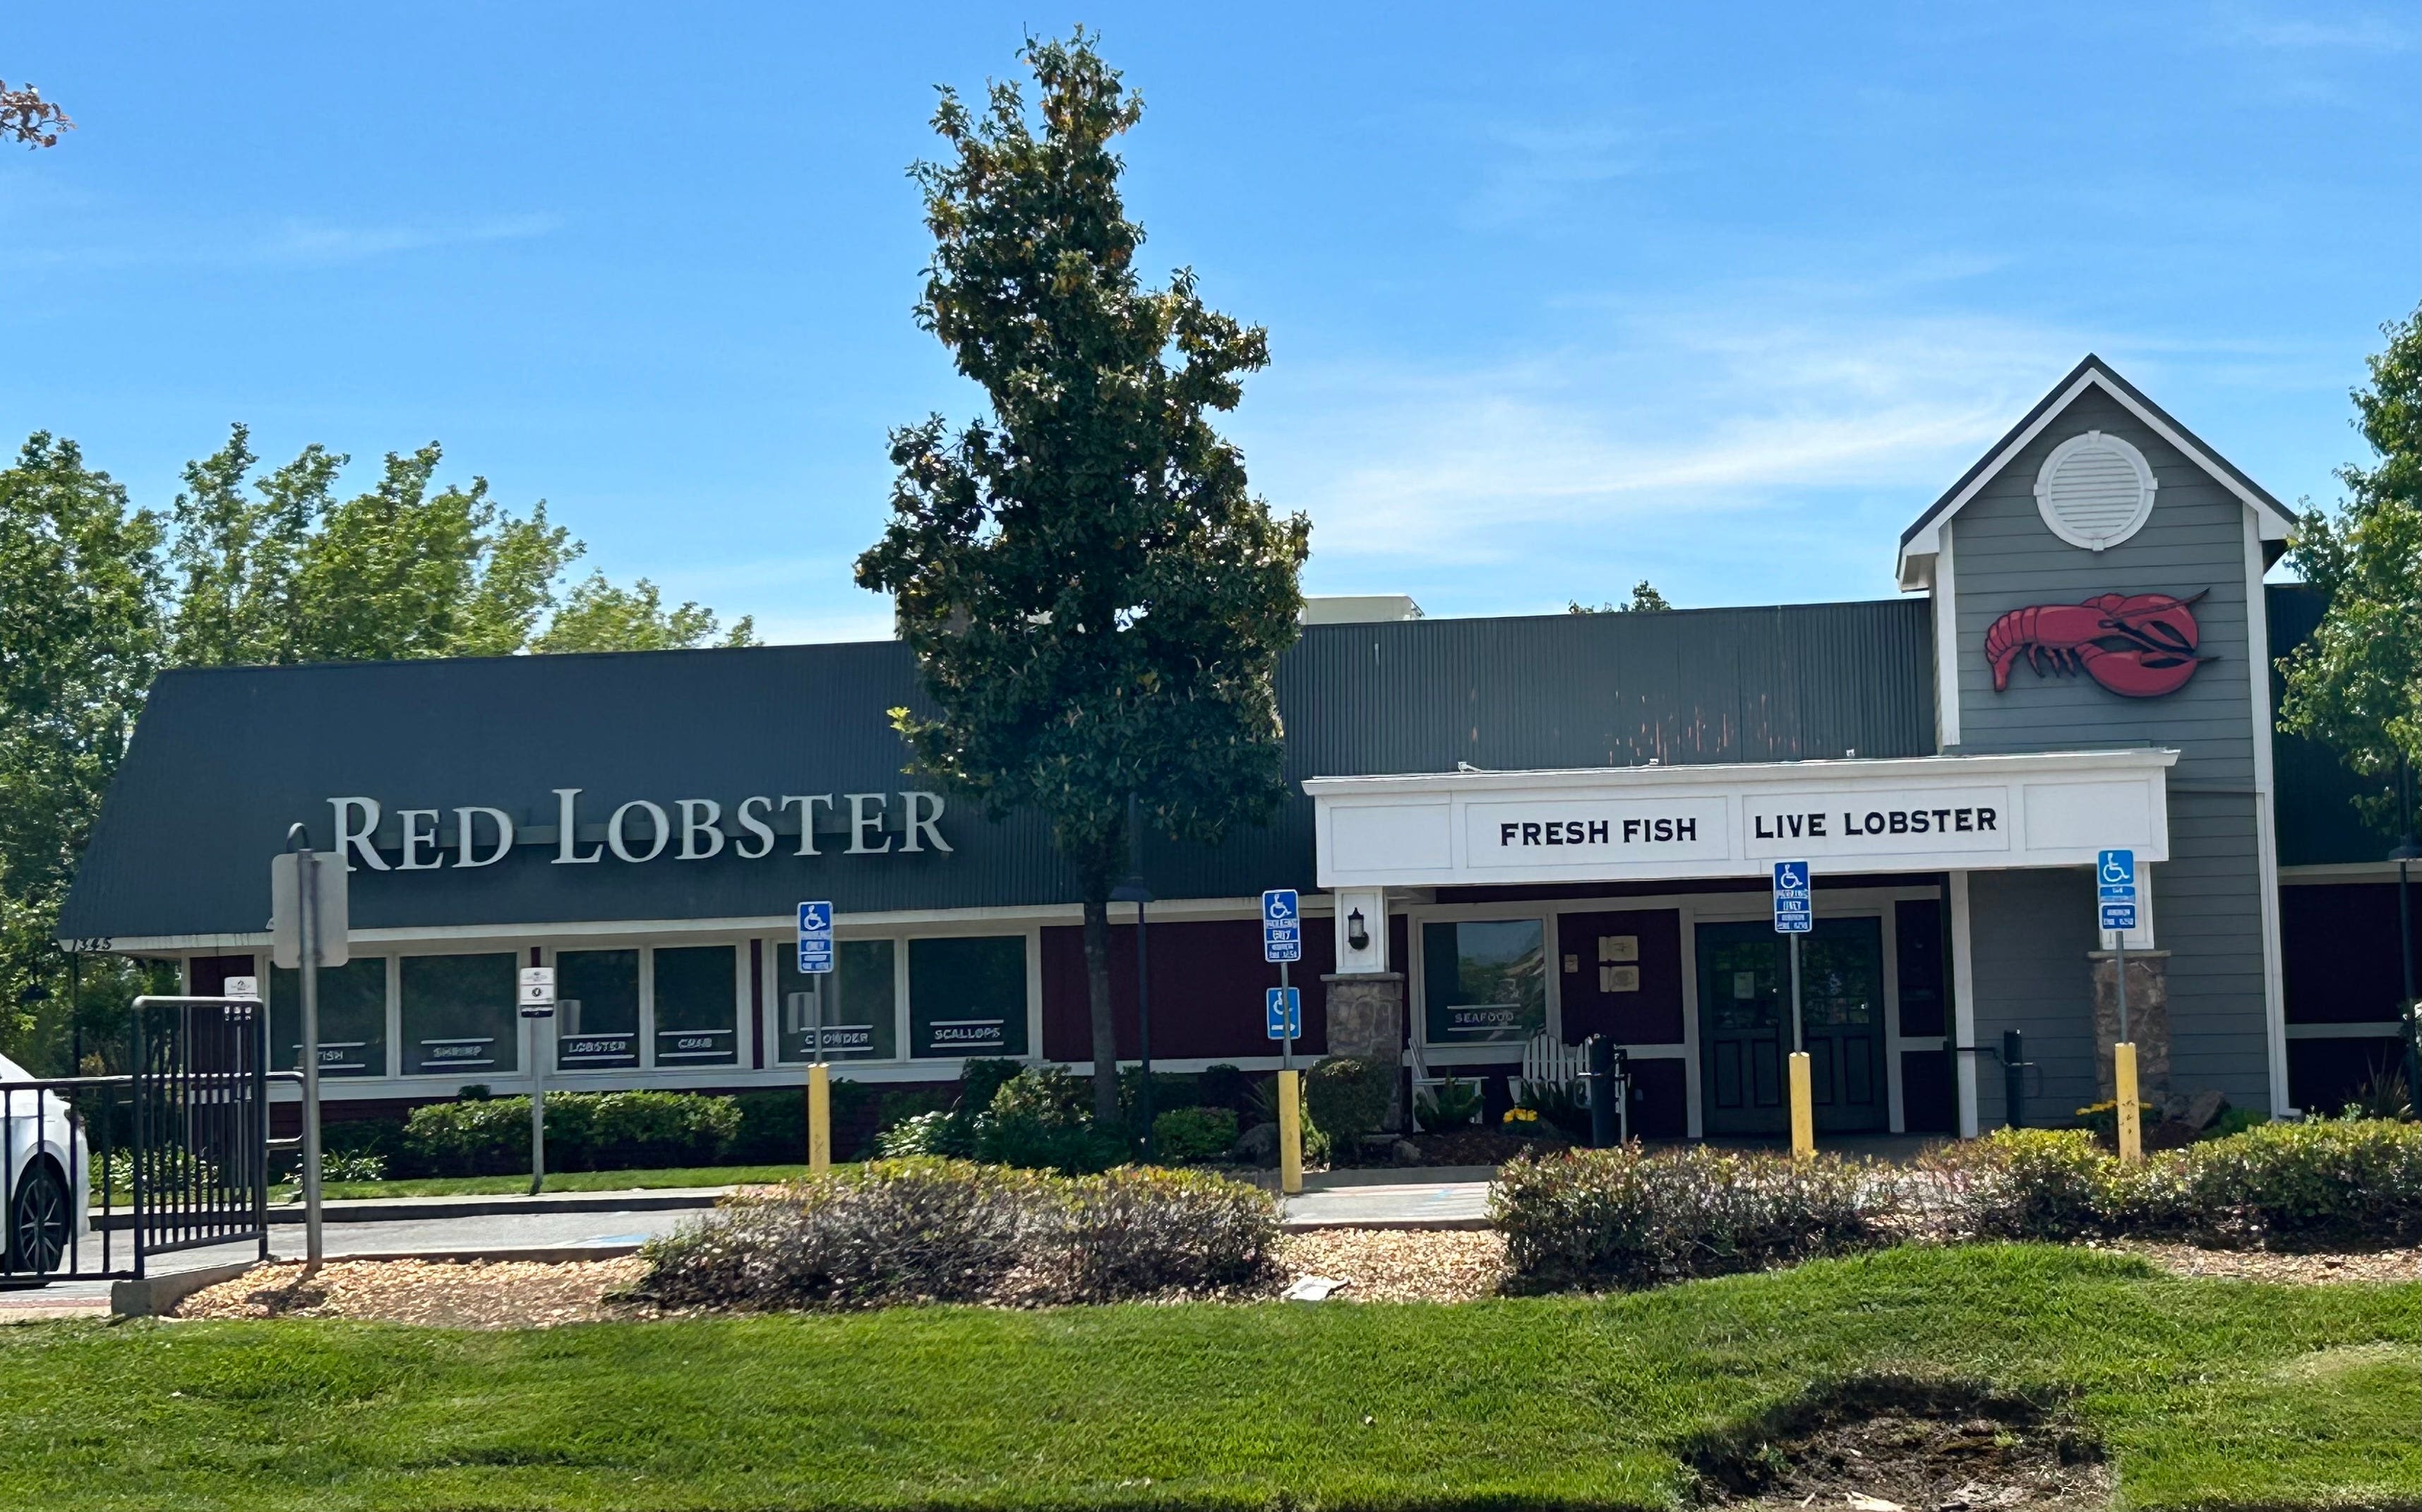 Redding Red Lobster among locations closed. Restaurant had been open 30-plus years